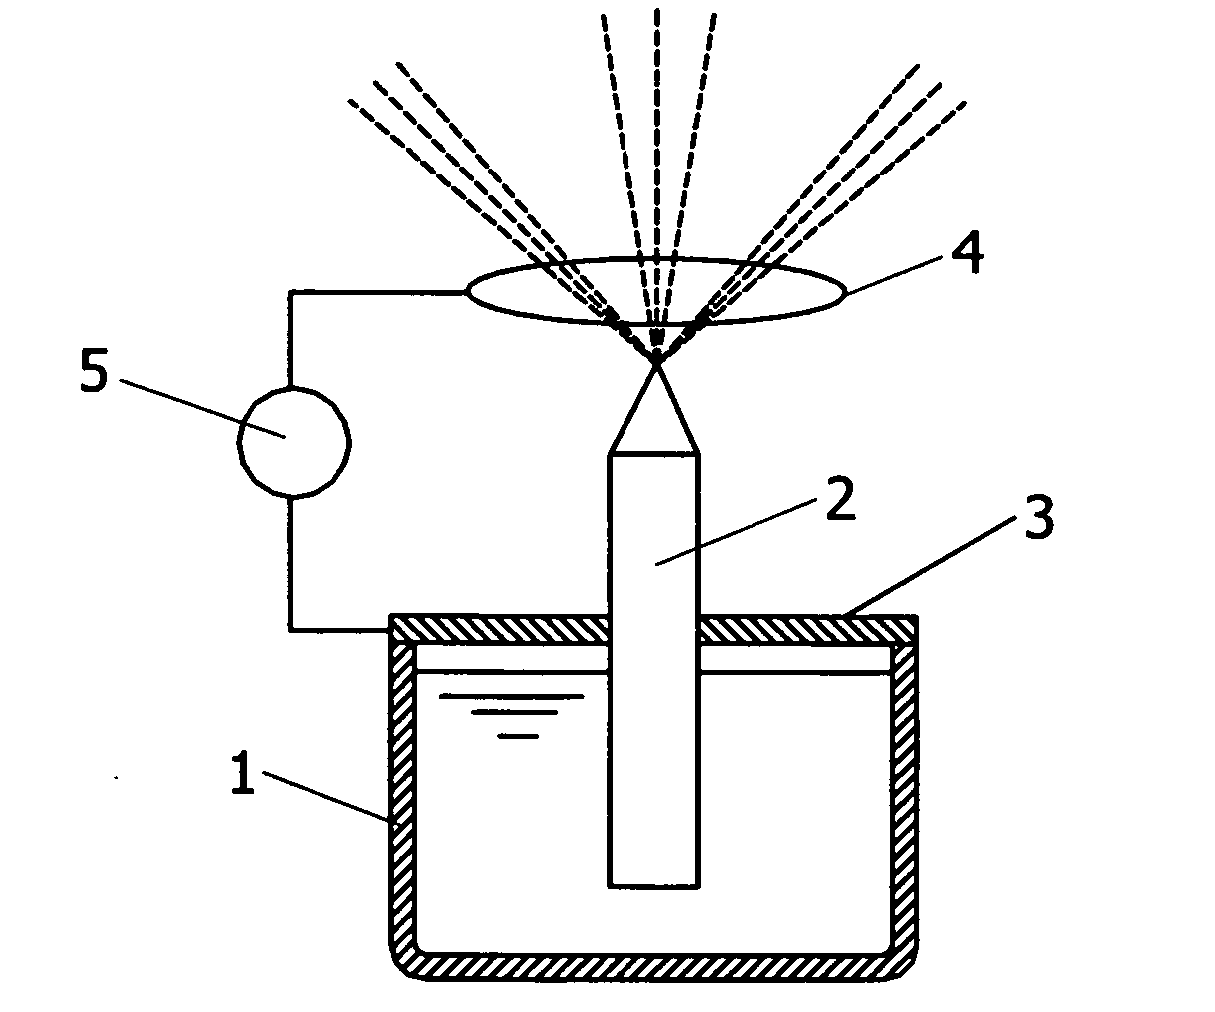 Charged water particle, and method for creating environment where mist of charged water particle is dispersed